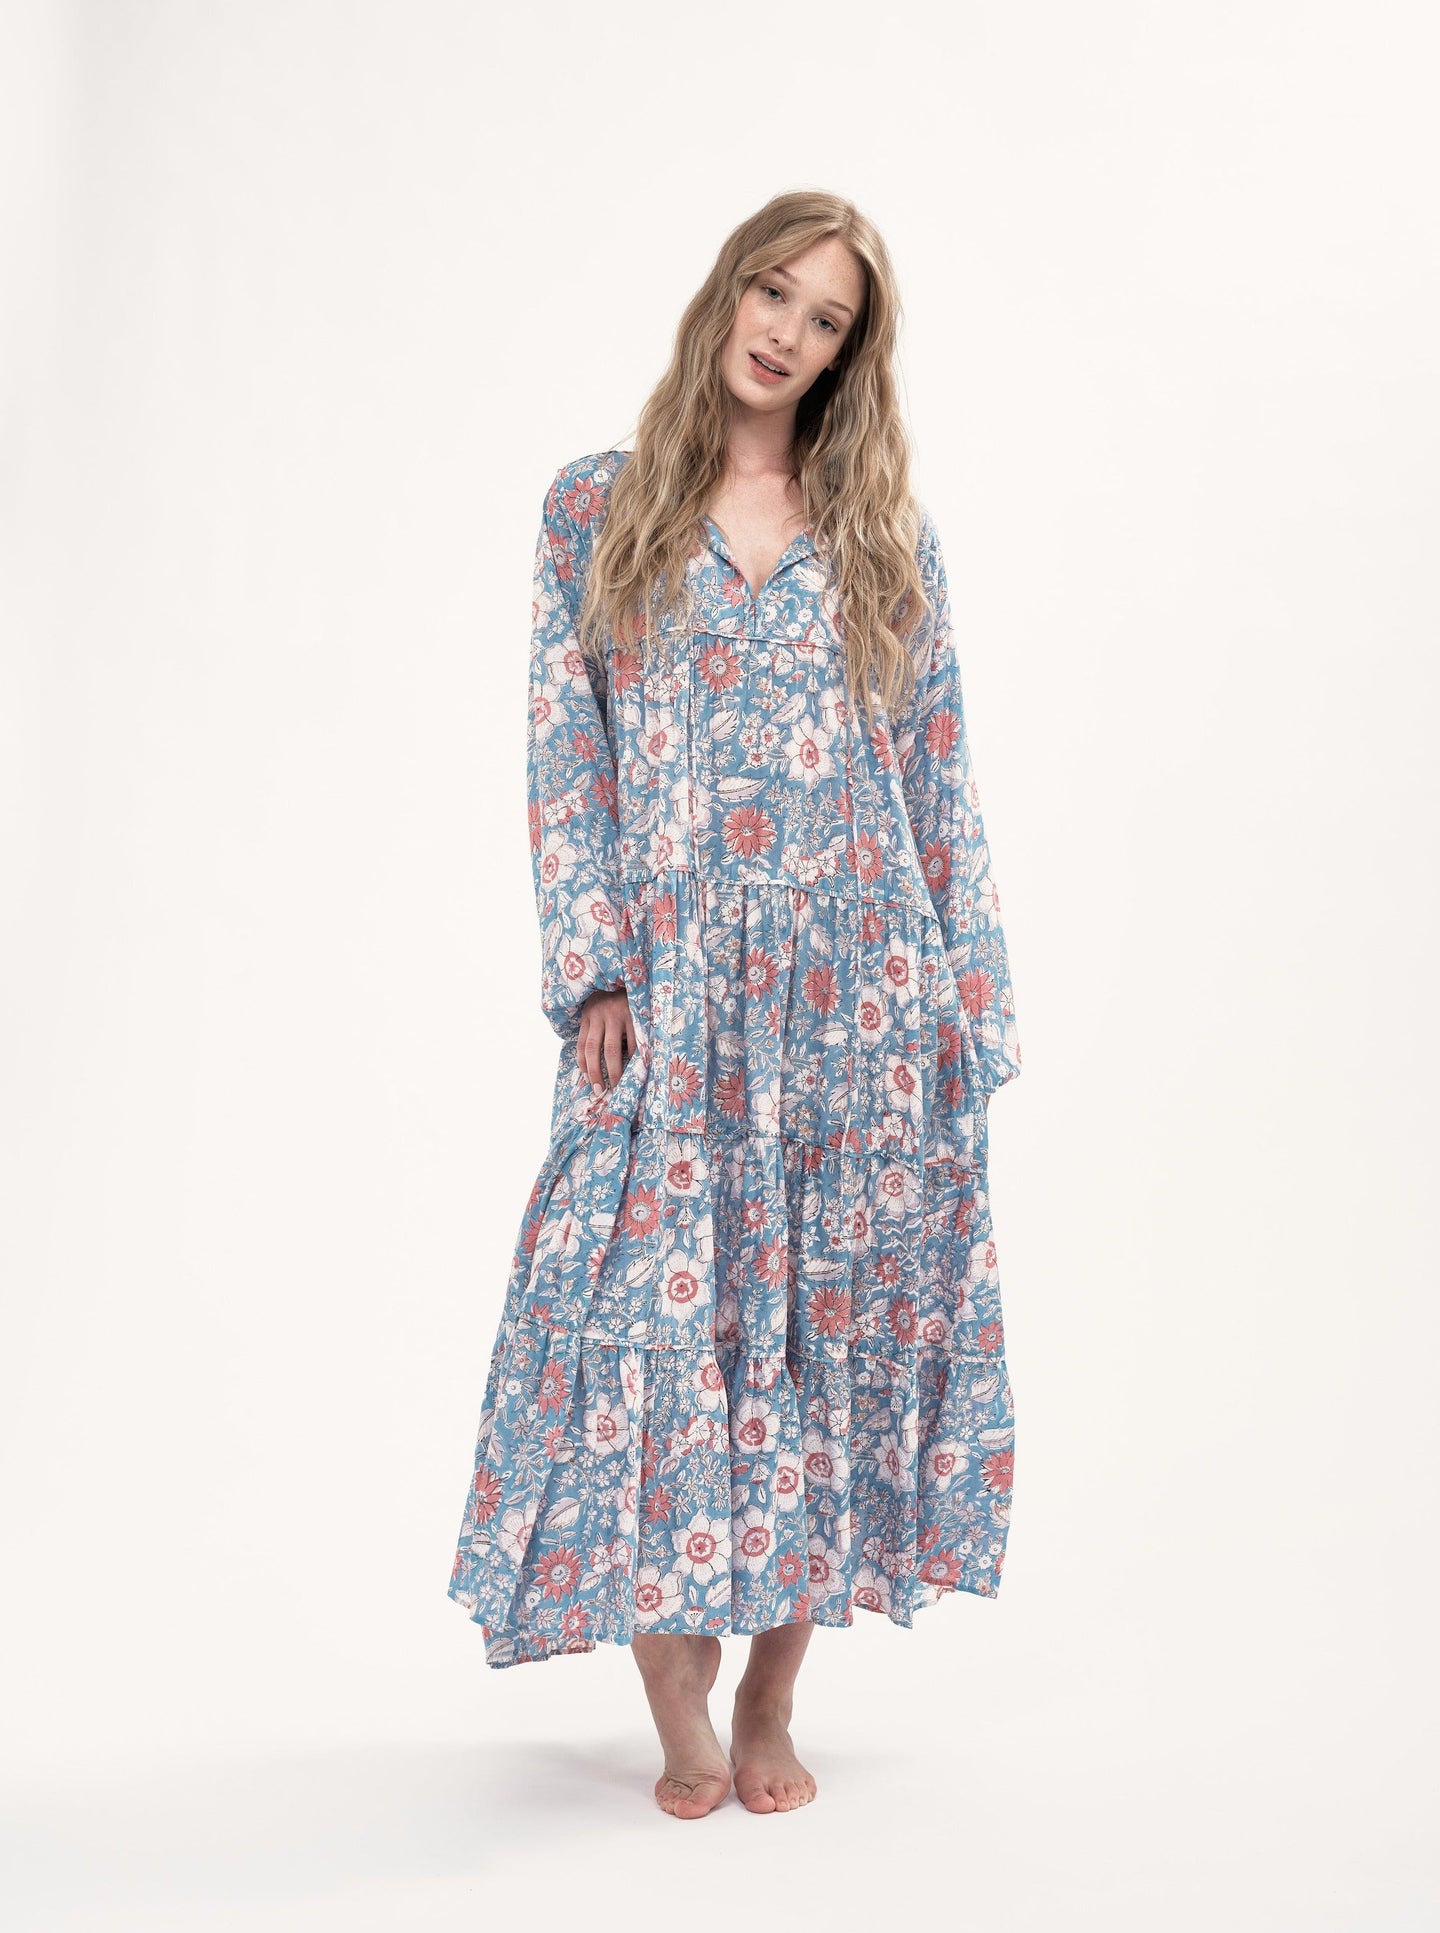 Willow Dress - Spring Maelu Designs XS Colette 